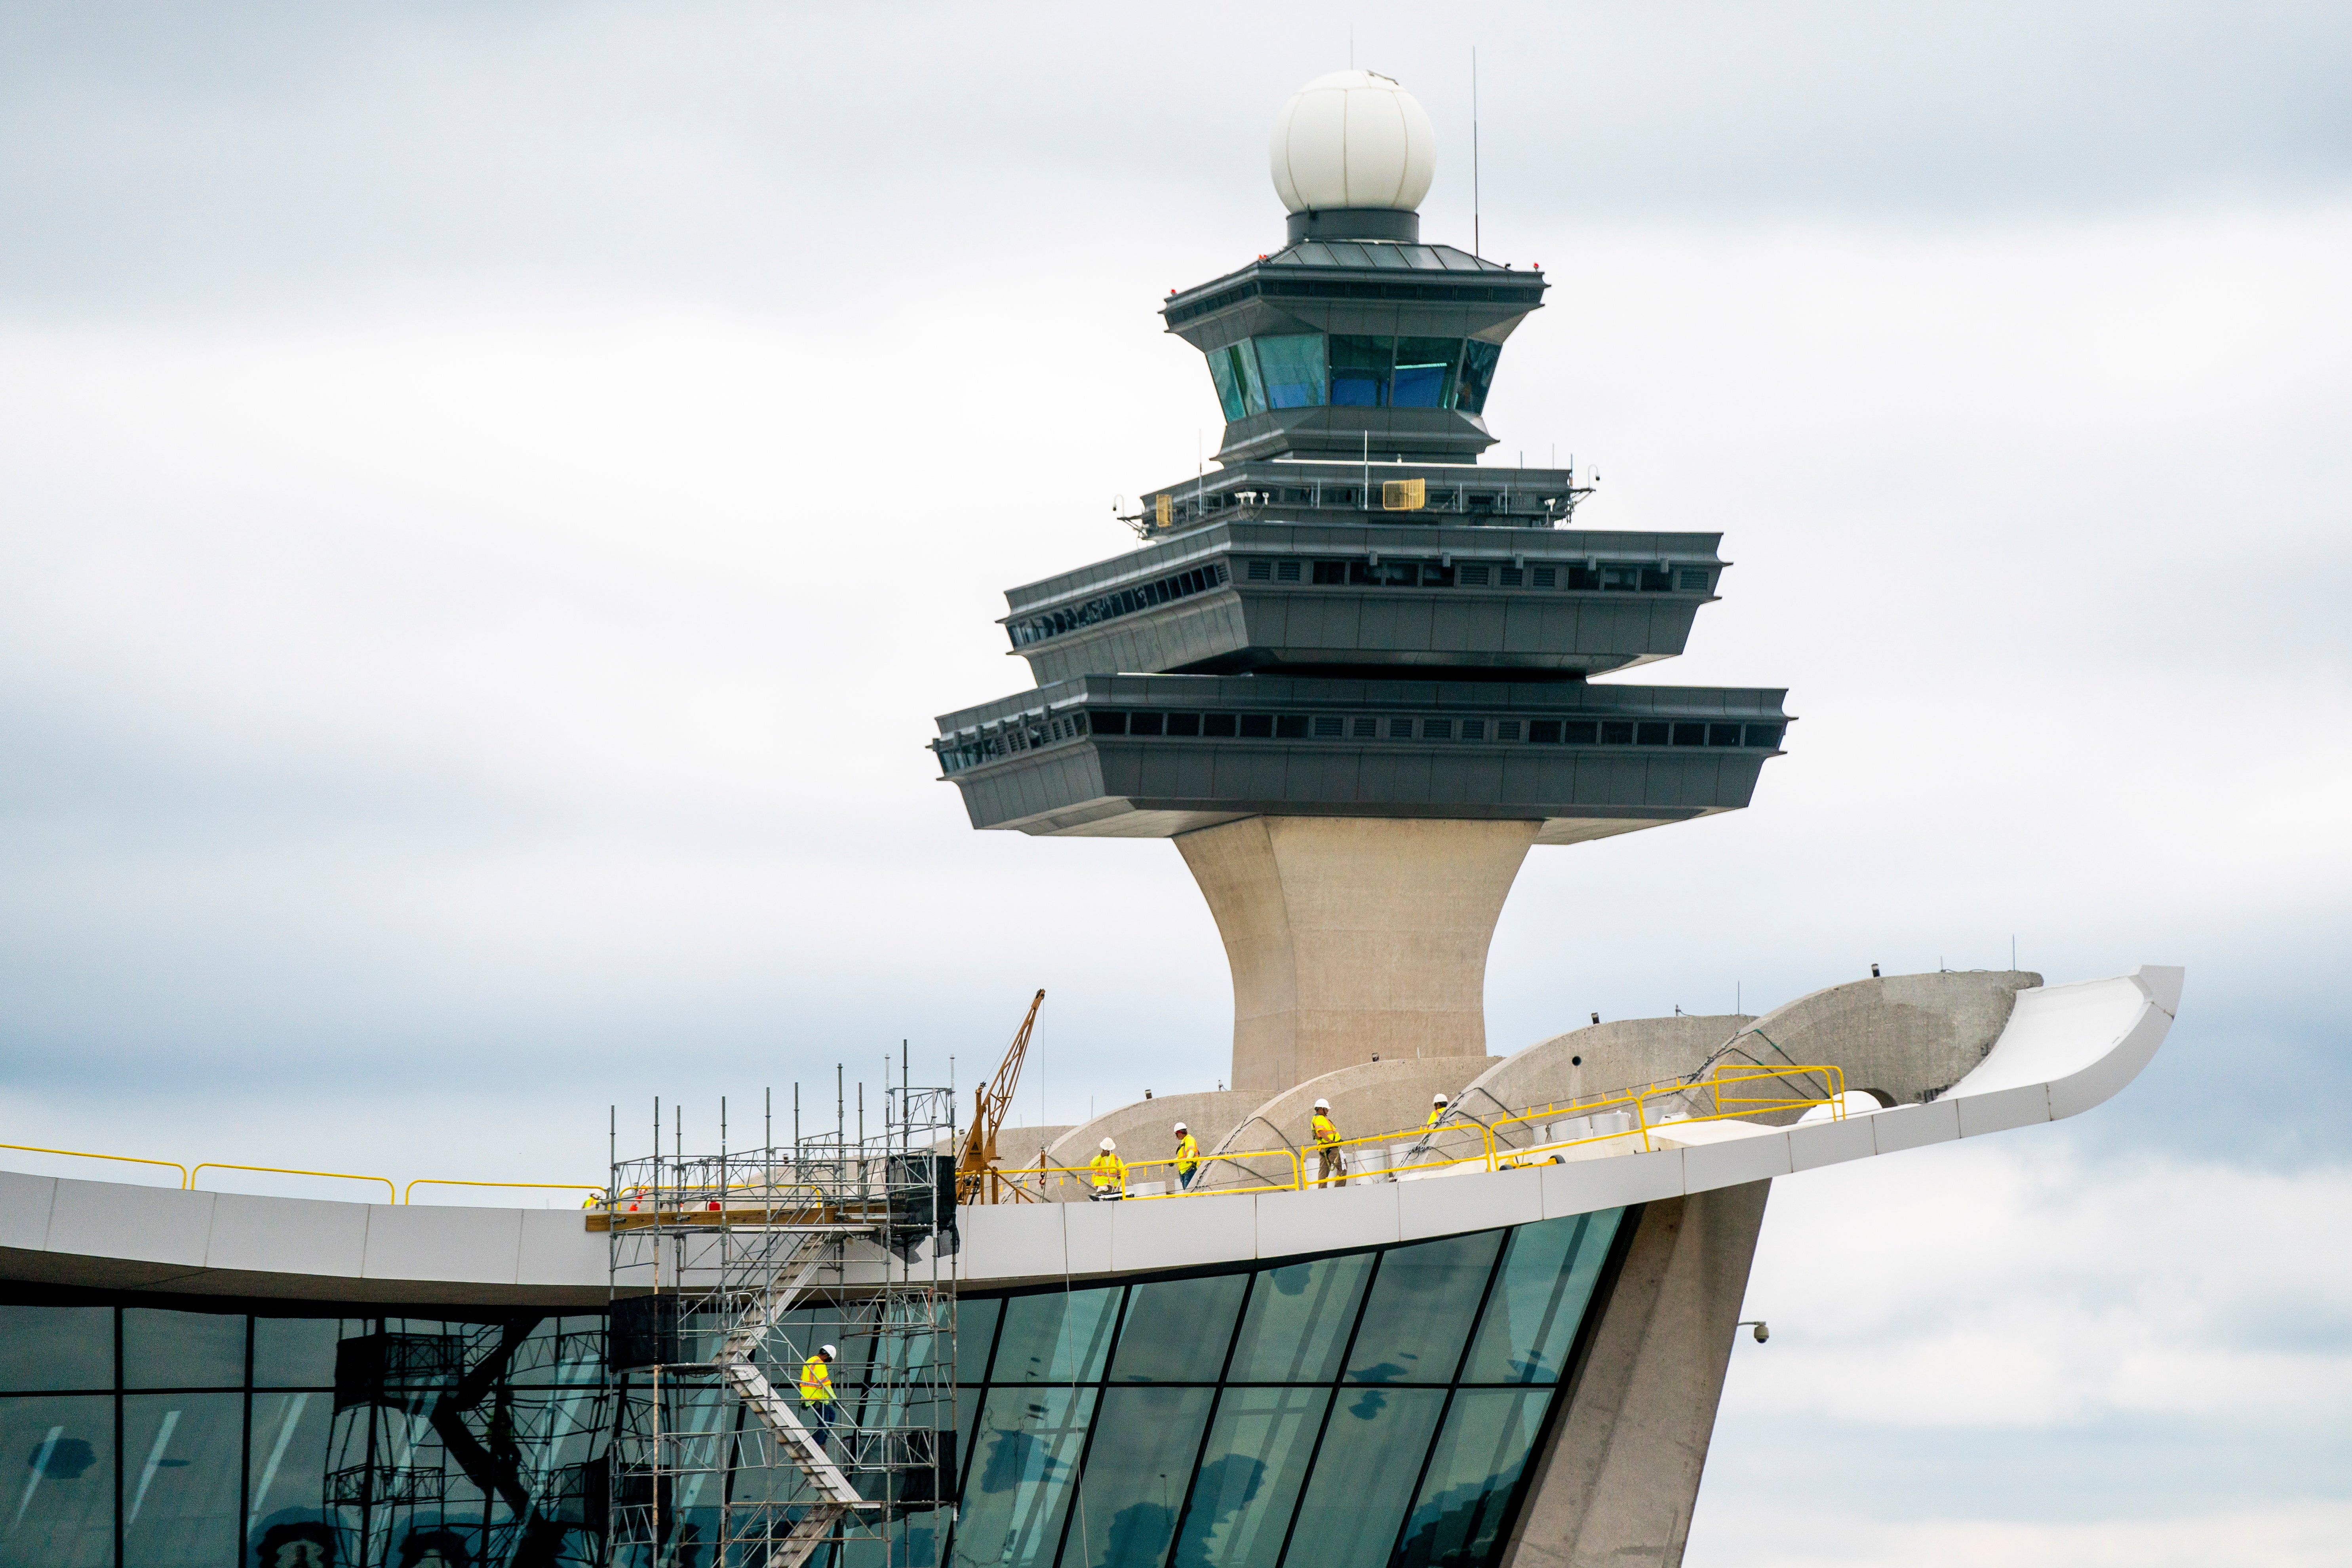 An airport work crew conducts repairs to the roof of the main terminal at Dulles International Airport